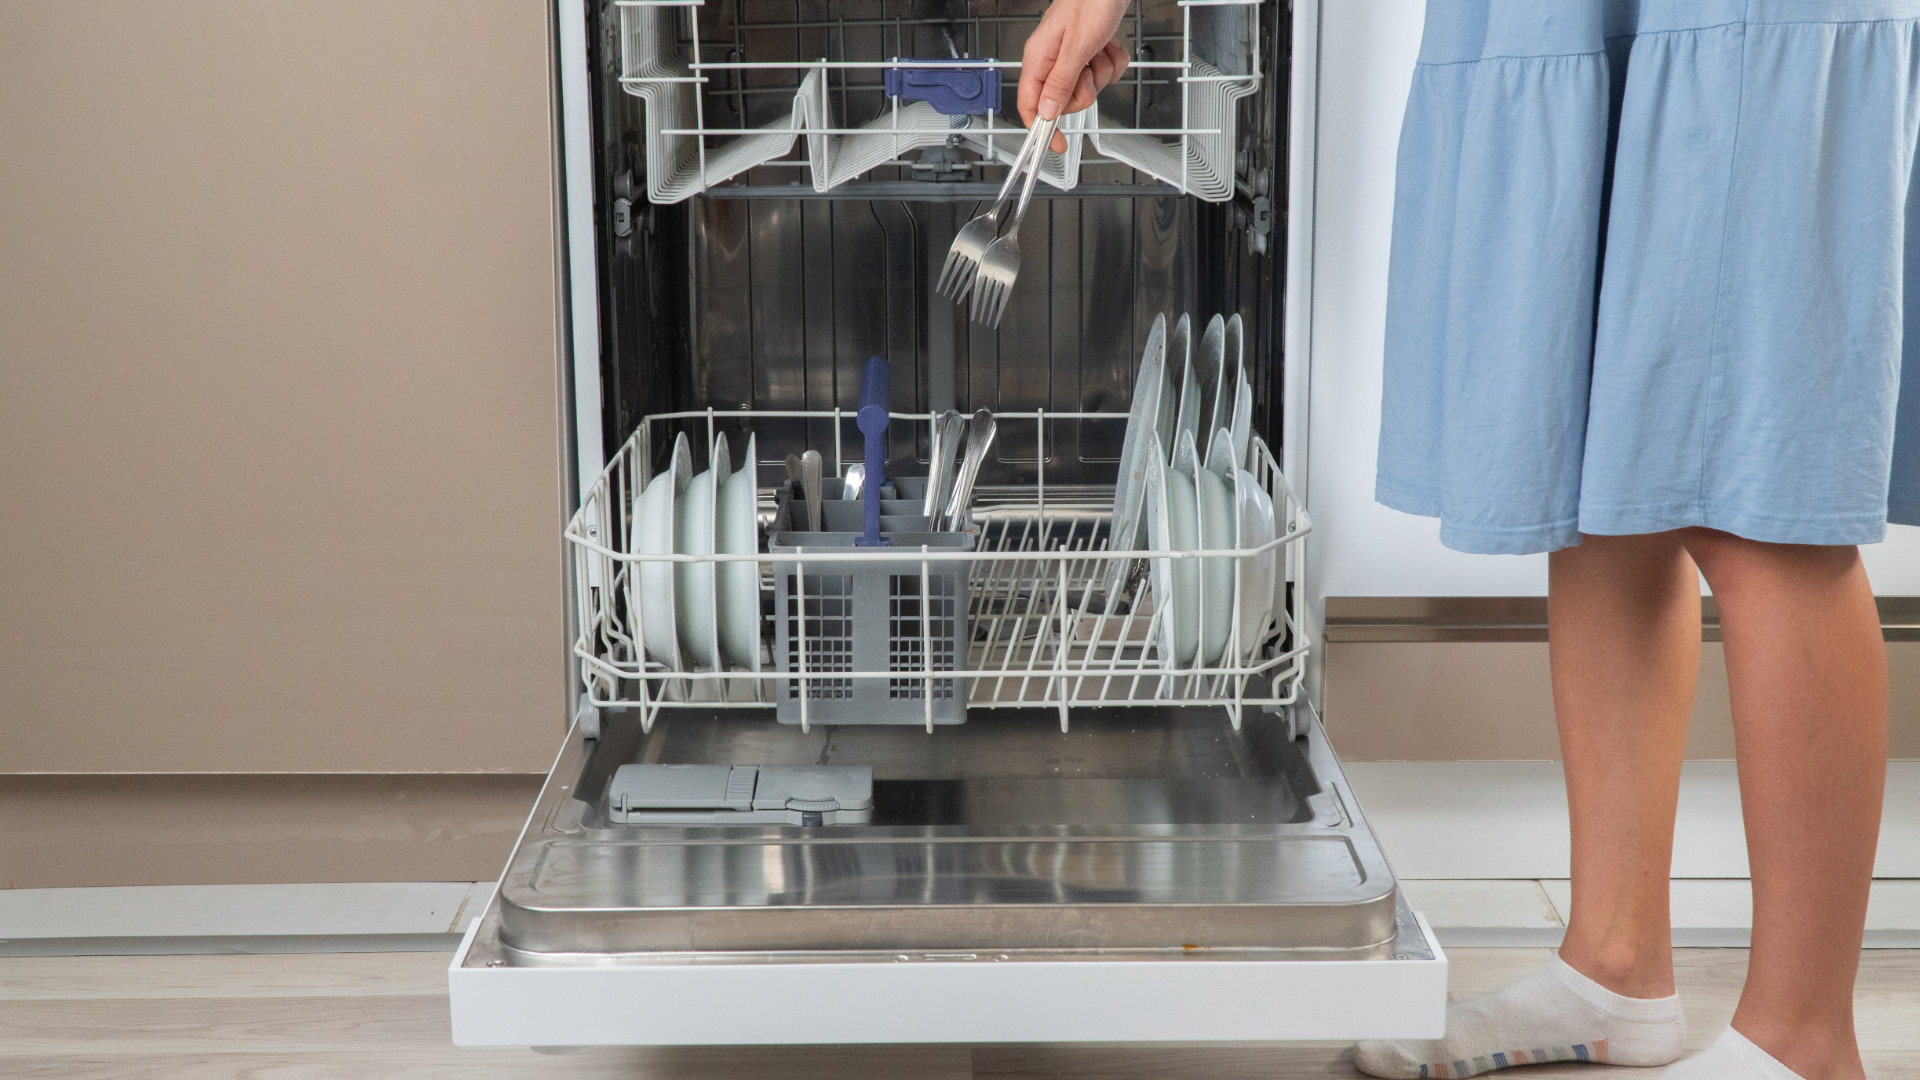 Featured image for “How To Clean Your Whirlpool Dishwasher”